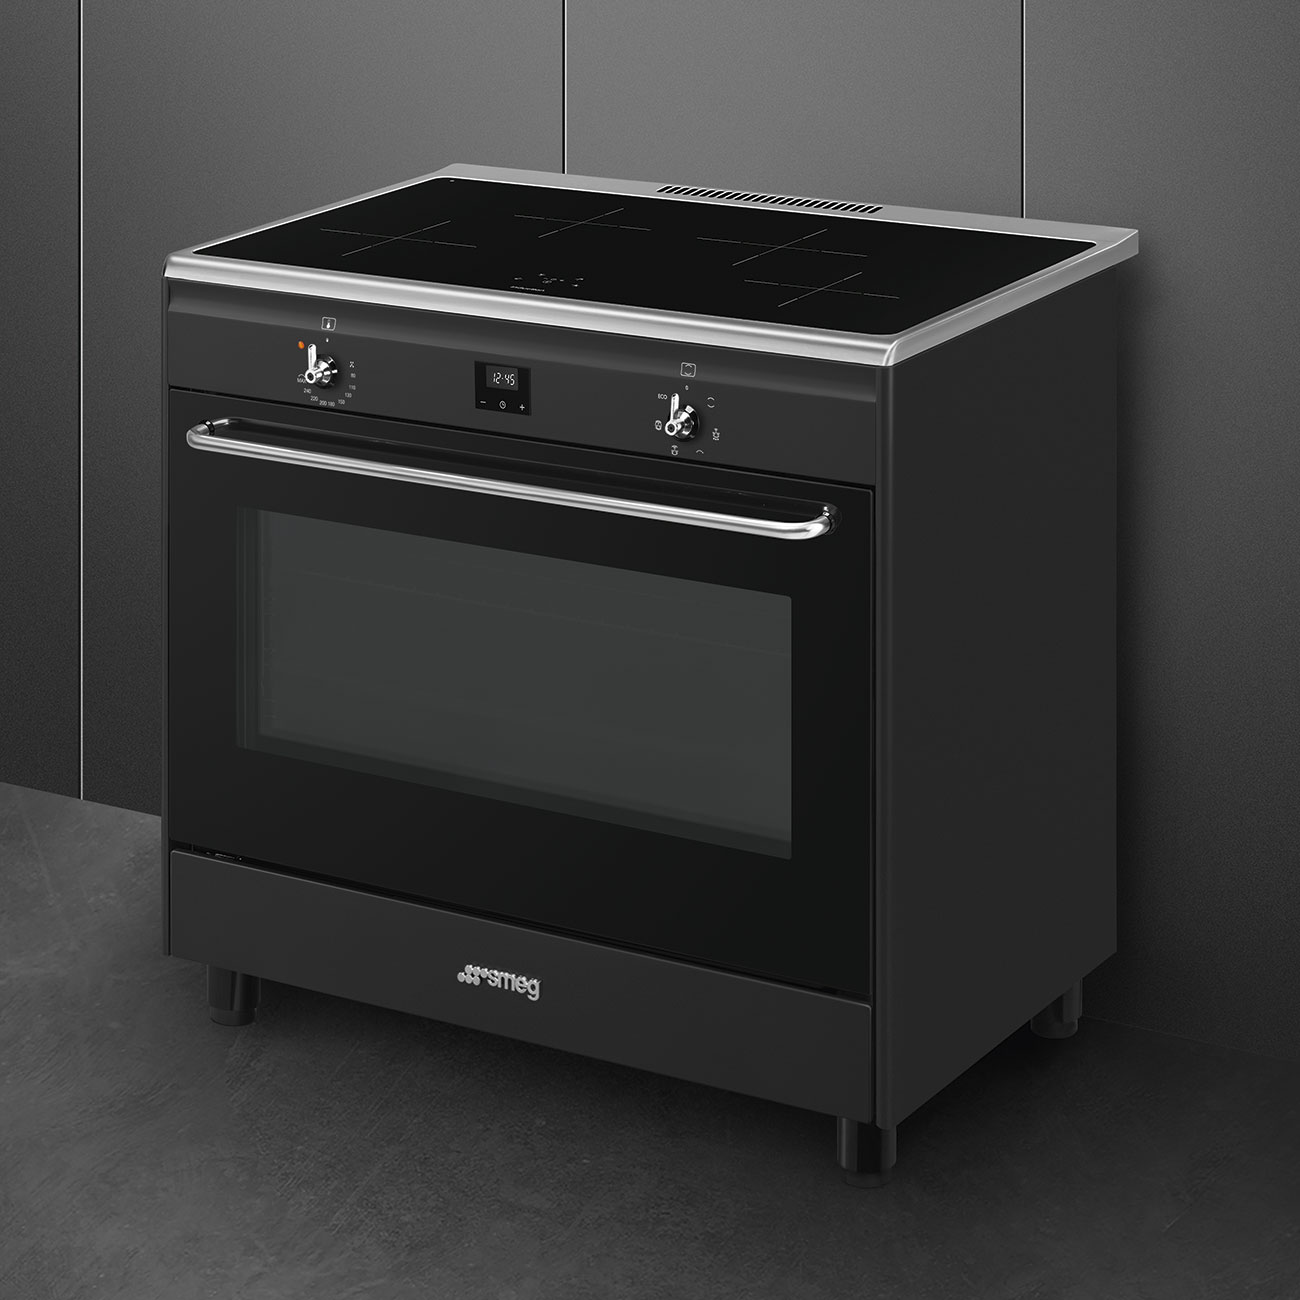 Smeg Anthracite Cooker with Induction Hob_3